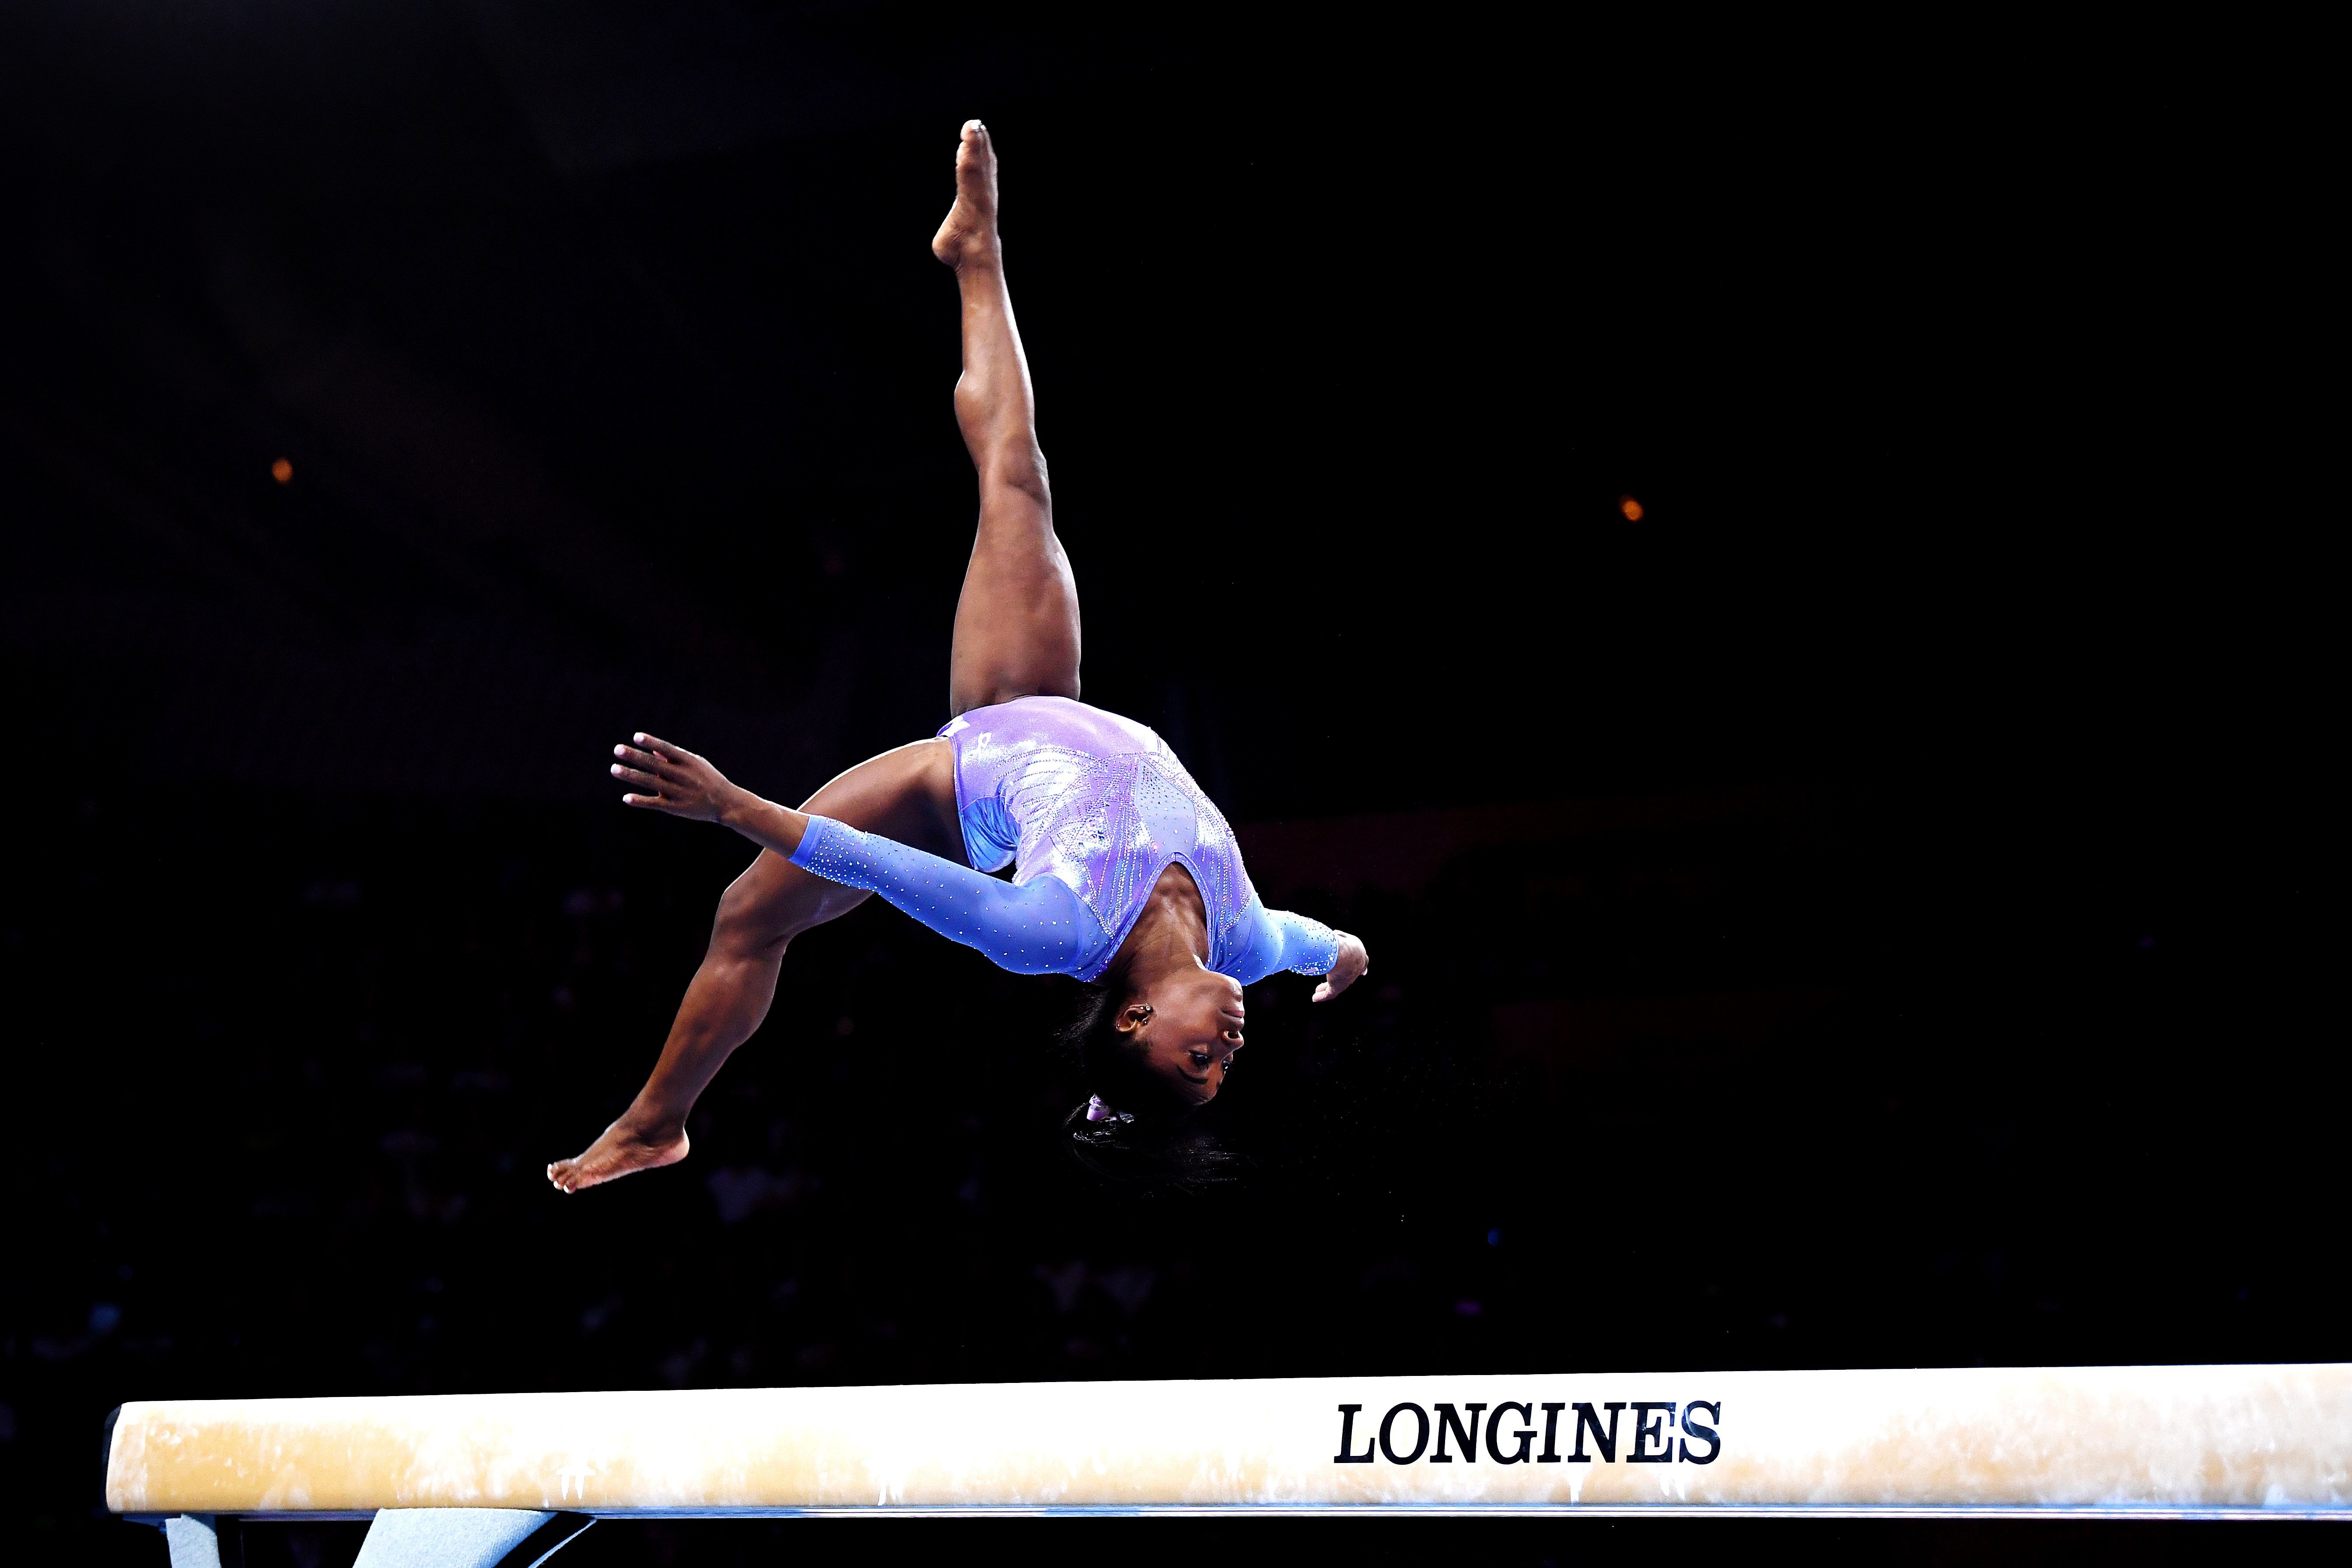 Simone Biles during day 10 of the 49th FIG Artistic Gymnastics World Championships on Oct. 13, 2019 in Stuttgart, Germany | Photo: Getty Images